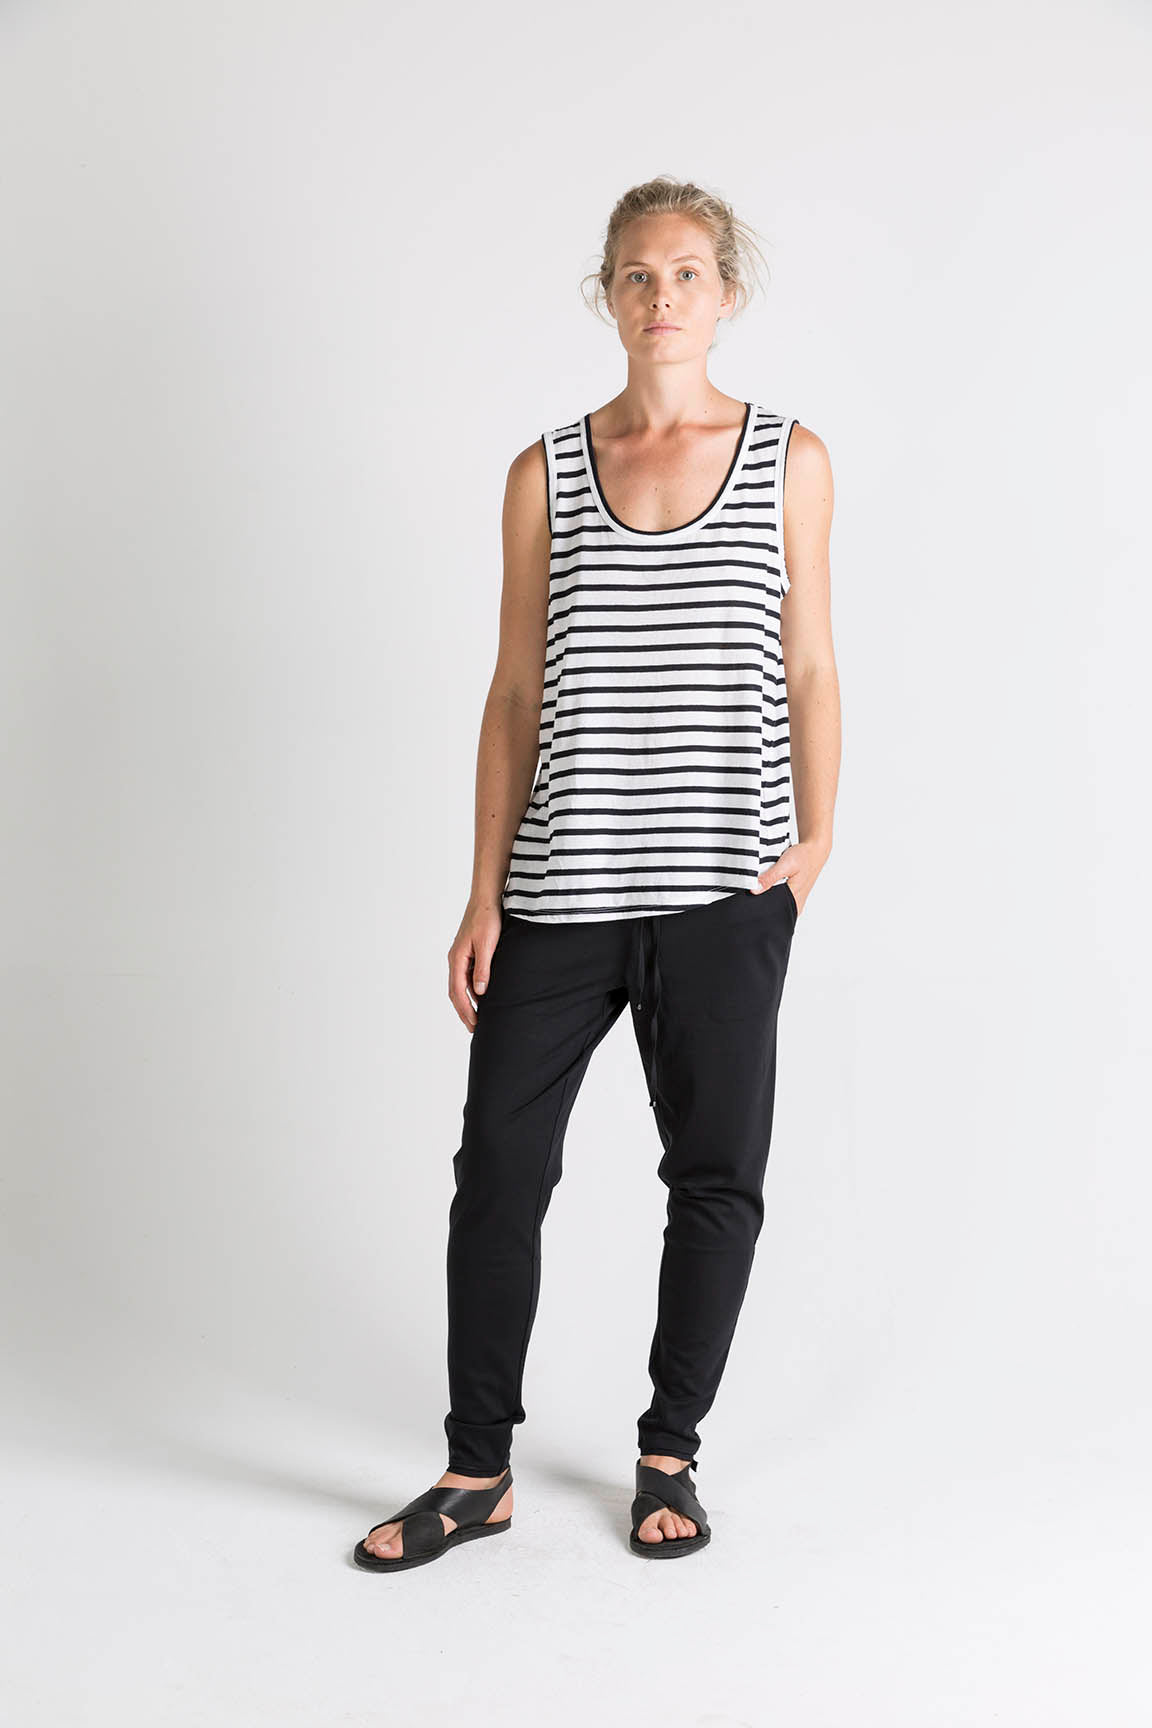 Ophelia and Ryder Scoop Neck Tank Top